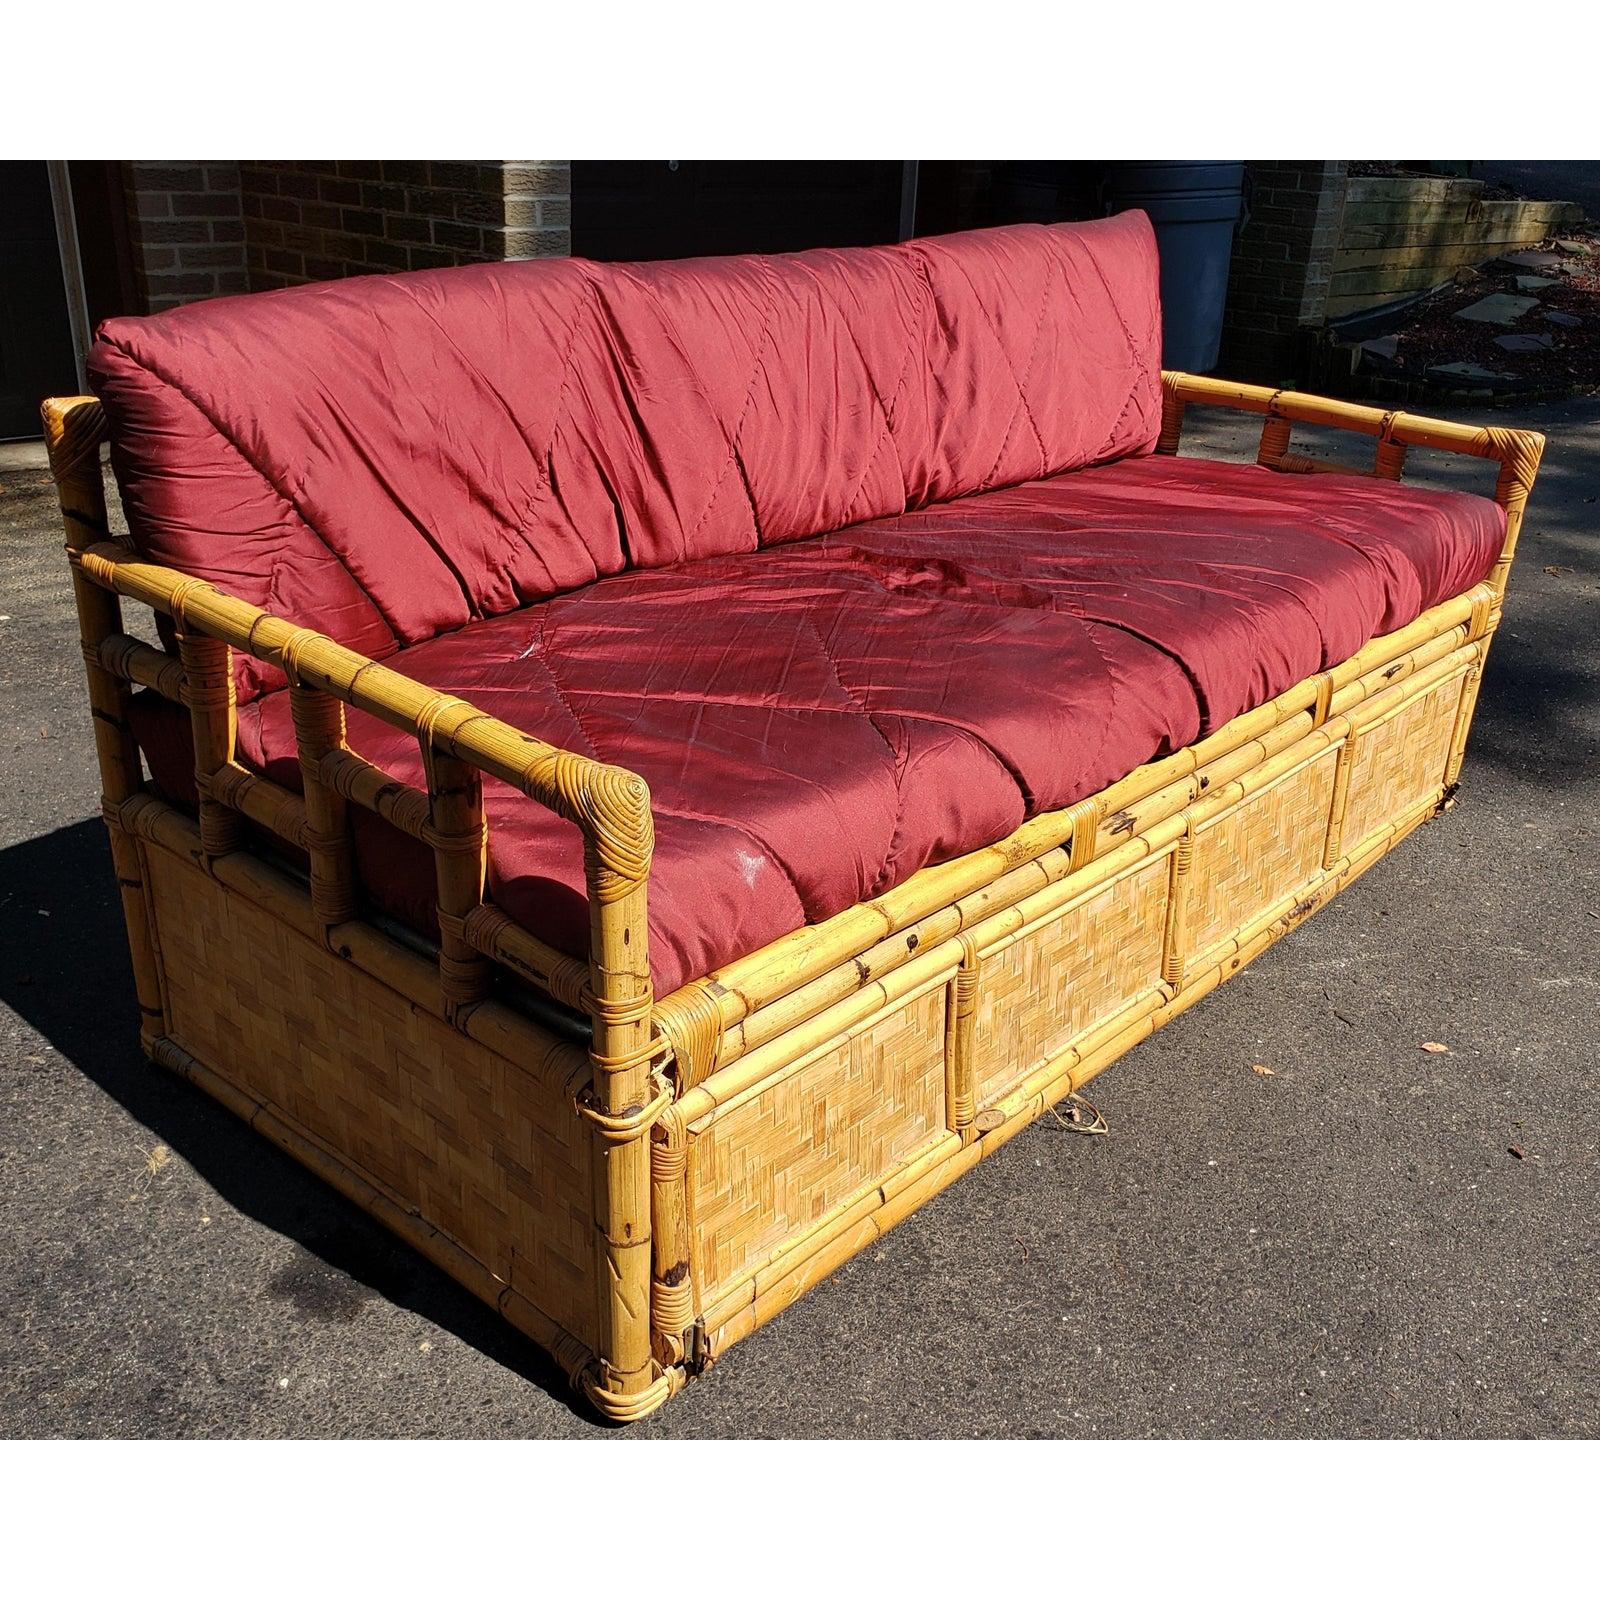 1960s Vintage Bamboo Sofa / Day Bed With Gated Underneath Storage Area For  Sale at 1stDibs | sofa with storage underneath, retro style sofa bed with  storage, bamboo sofas